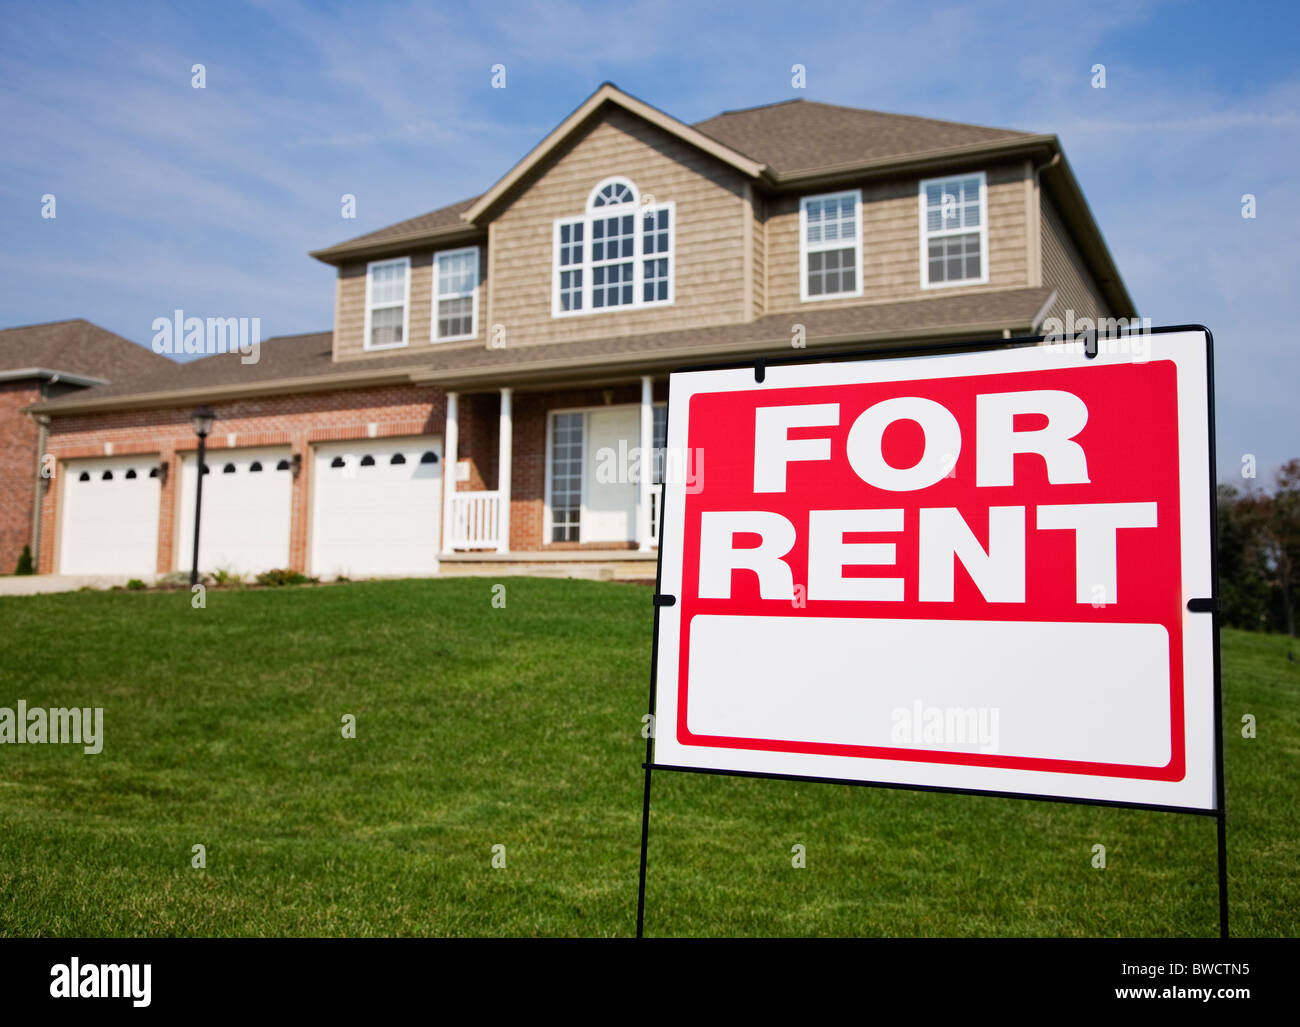 USA, Illinois, Metamora, For rent sign in front of house Stock Photo